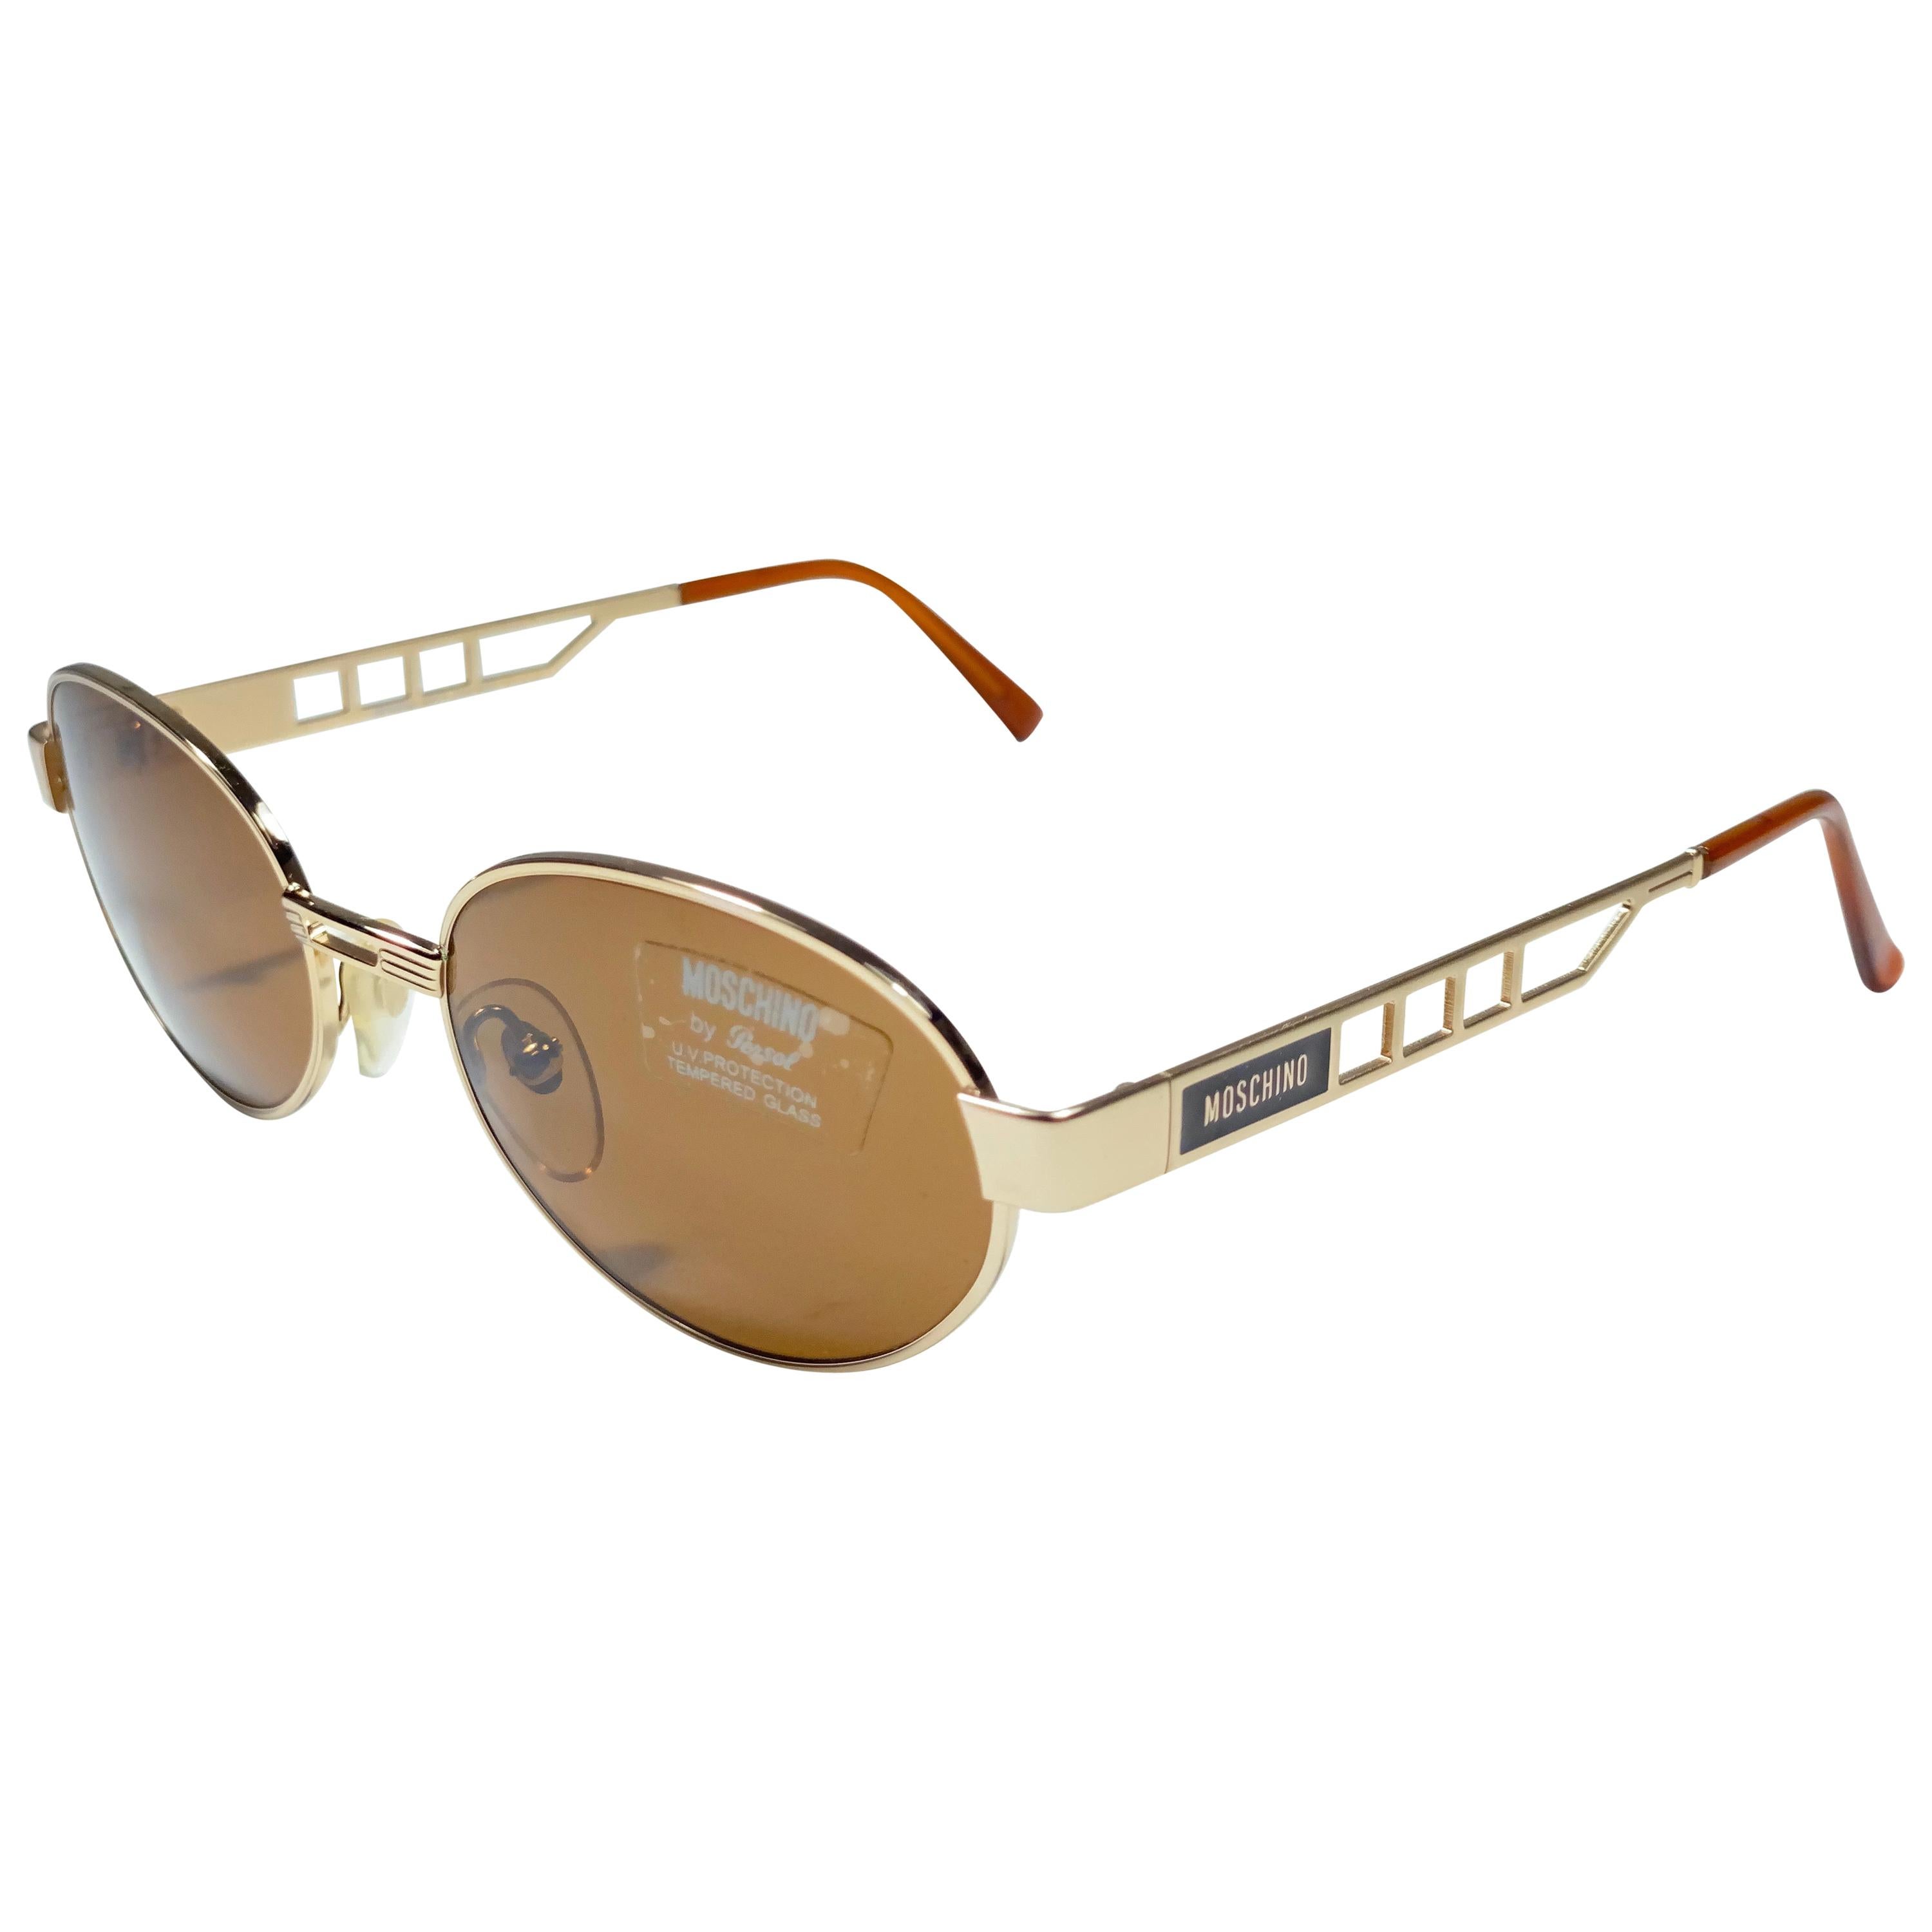 New Vintage Moschino By Persol MM3006 Oval Medium Gold 1990 Sunglasses Italy For Sale